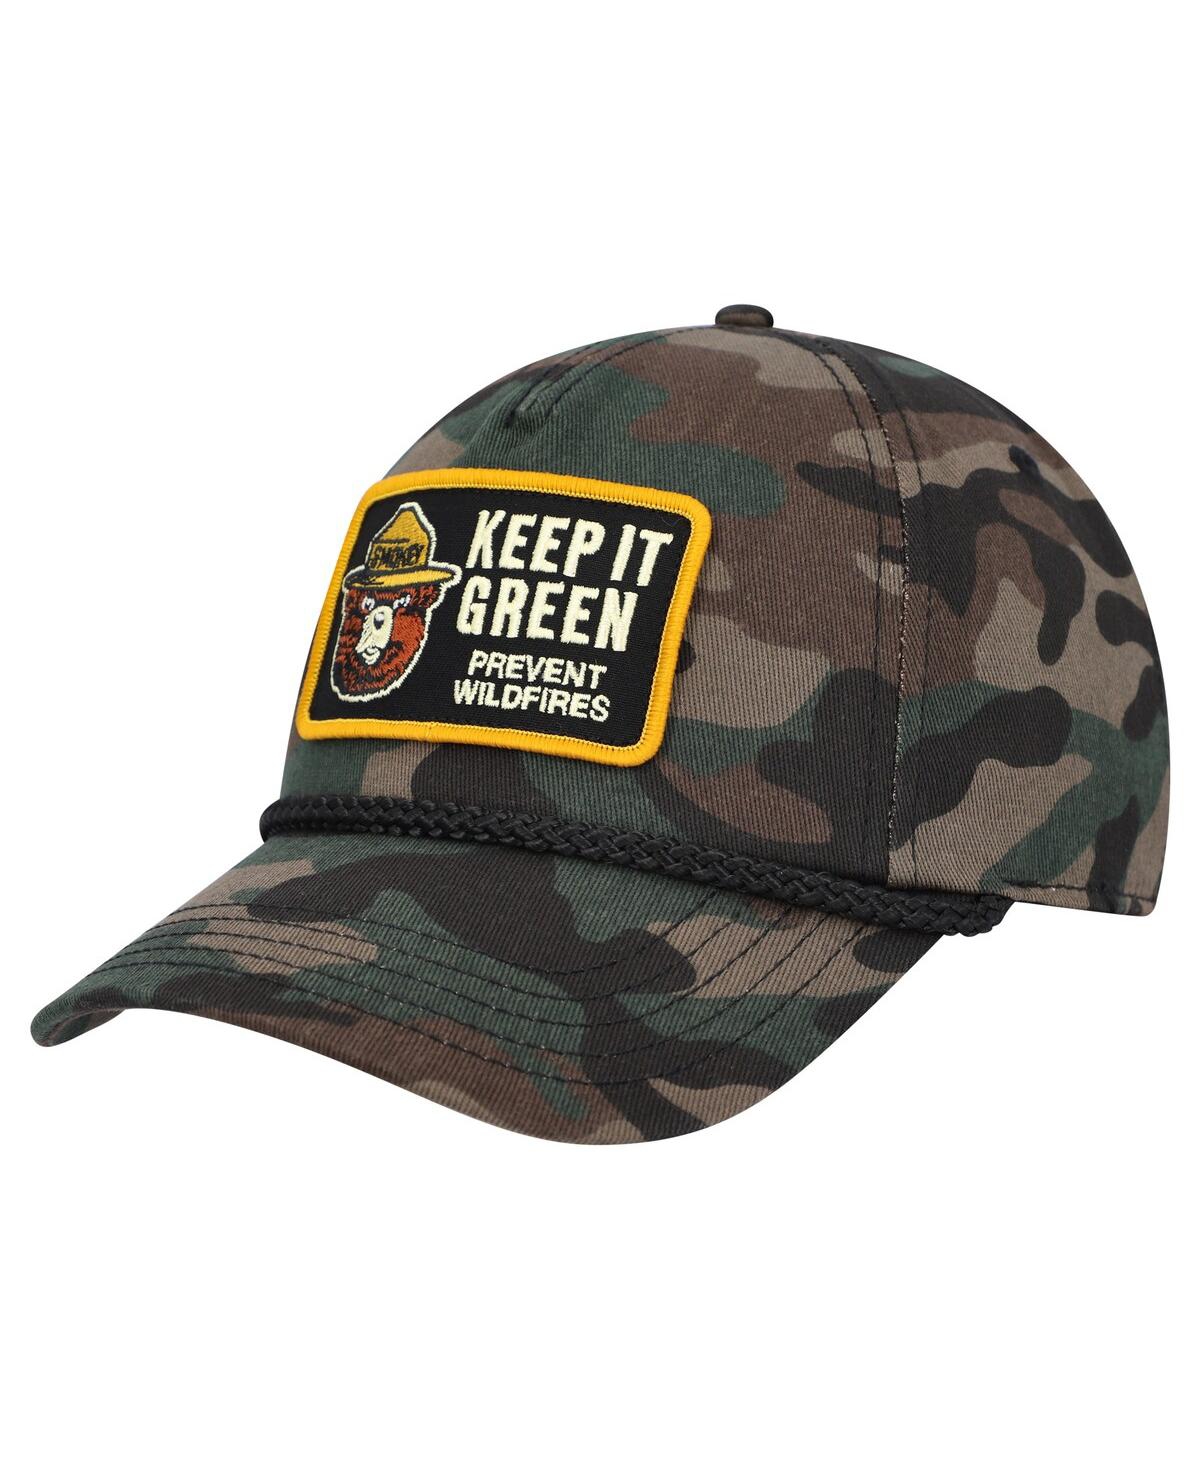 American Needle Smokey The Bear Camo Hat In Camo, Men's At Urban Outfitters